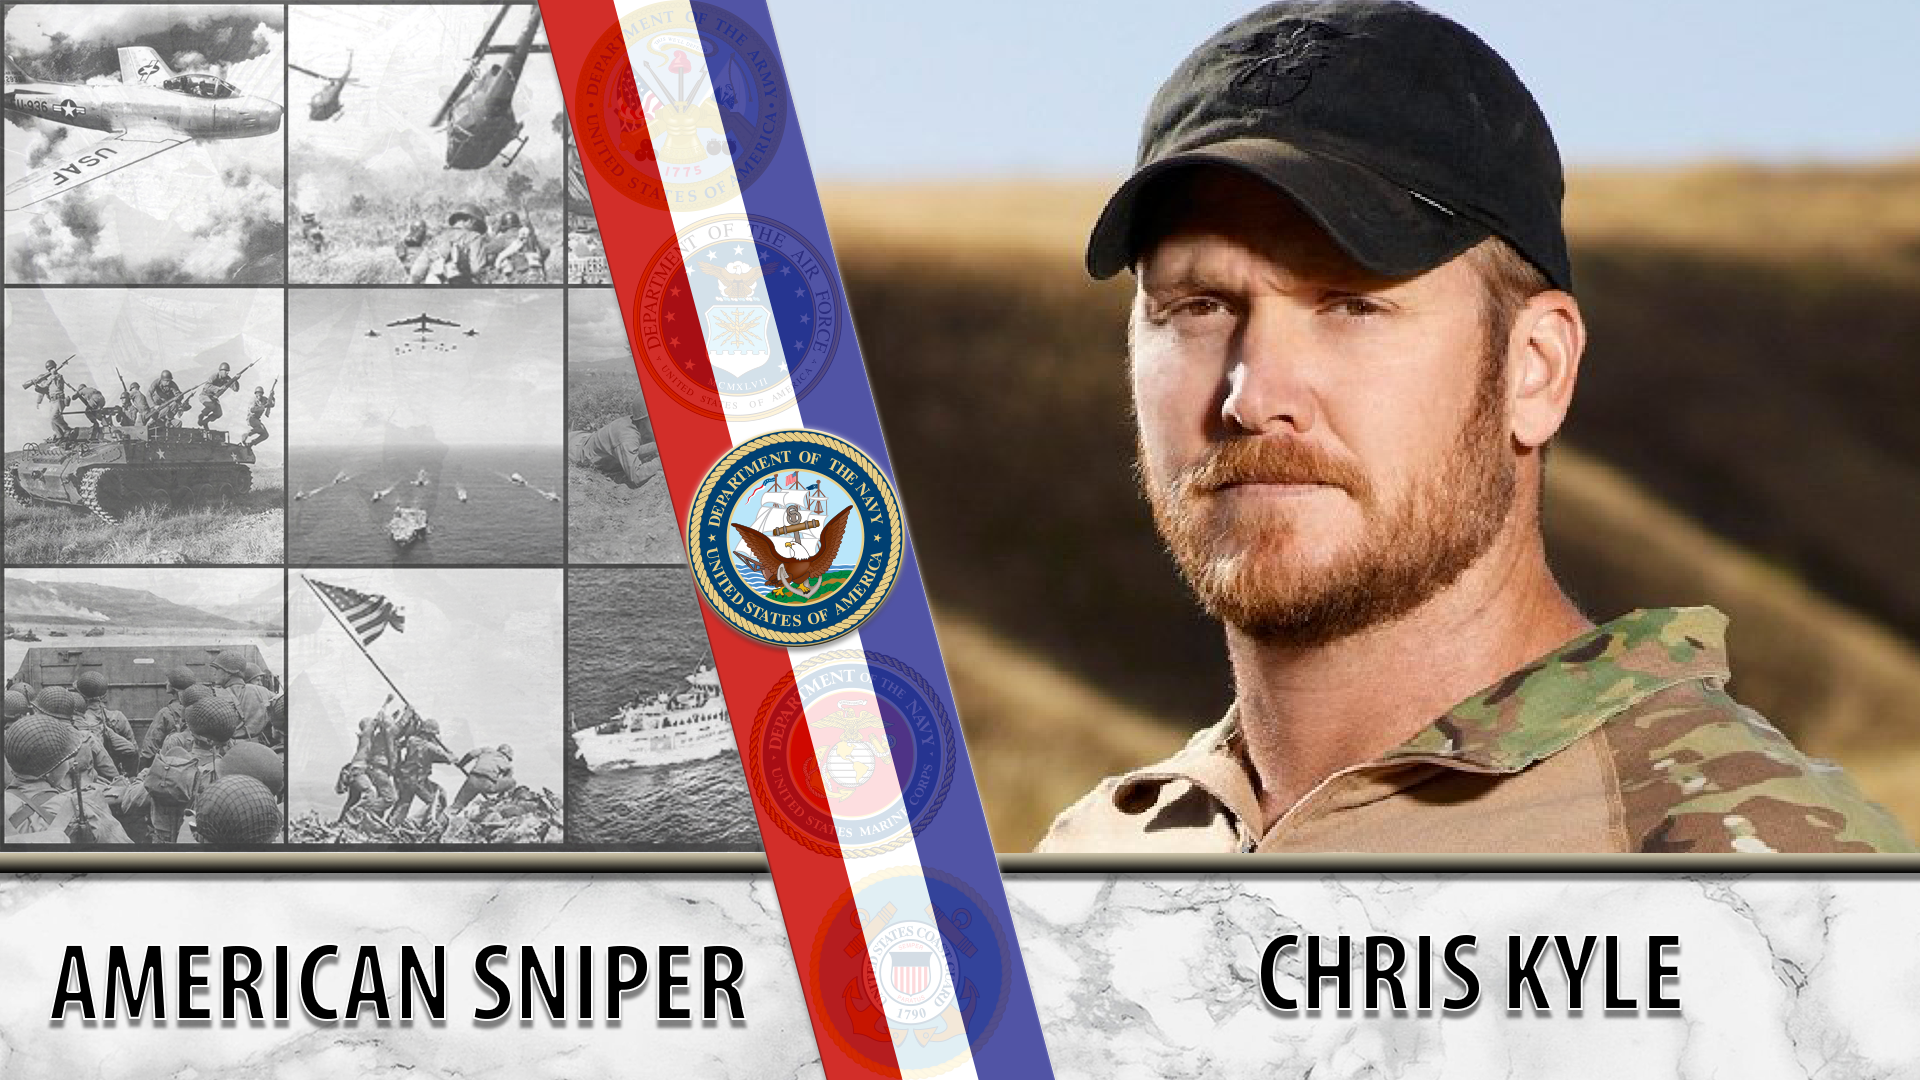 Tribute to Chris Kyle by anbuSquadLeader on DeviantArt